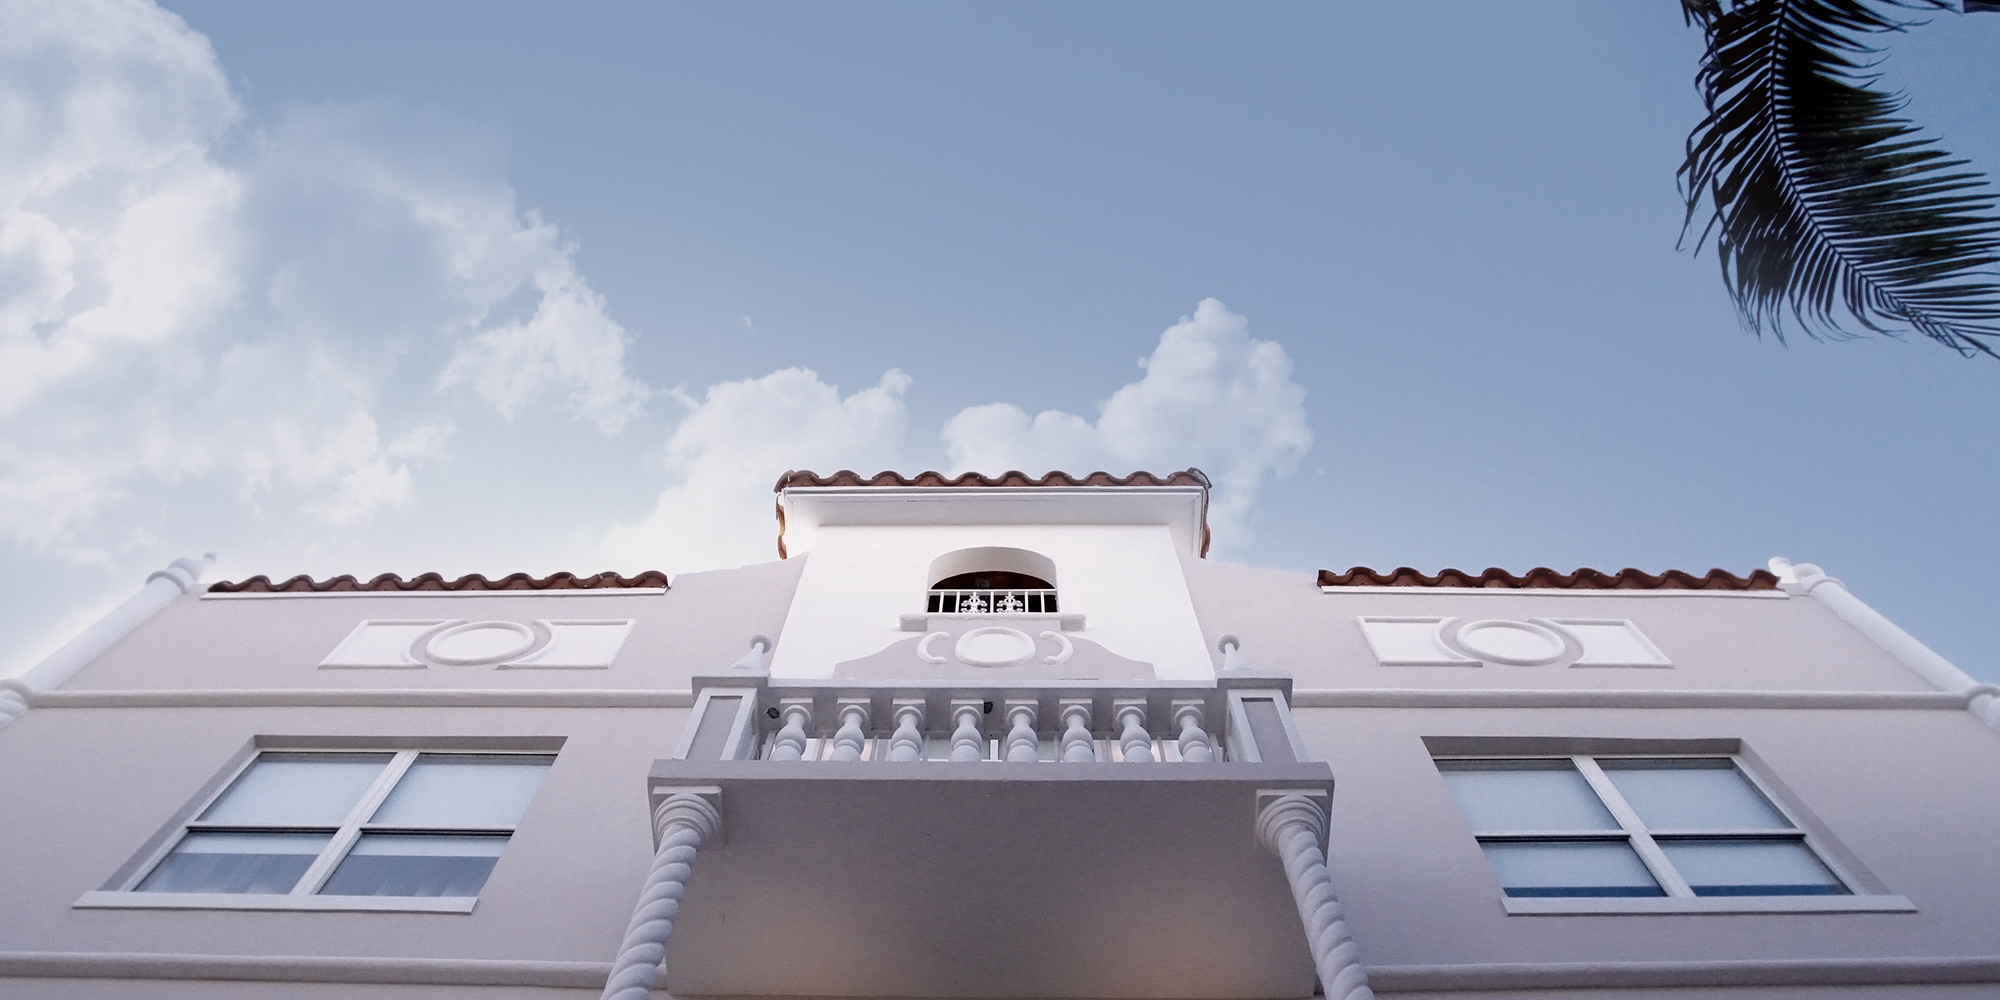 A street-level photo looking up at a new spanish-style hotel in south beach